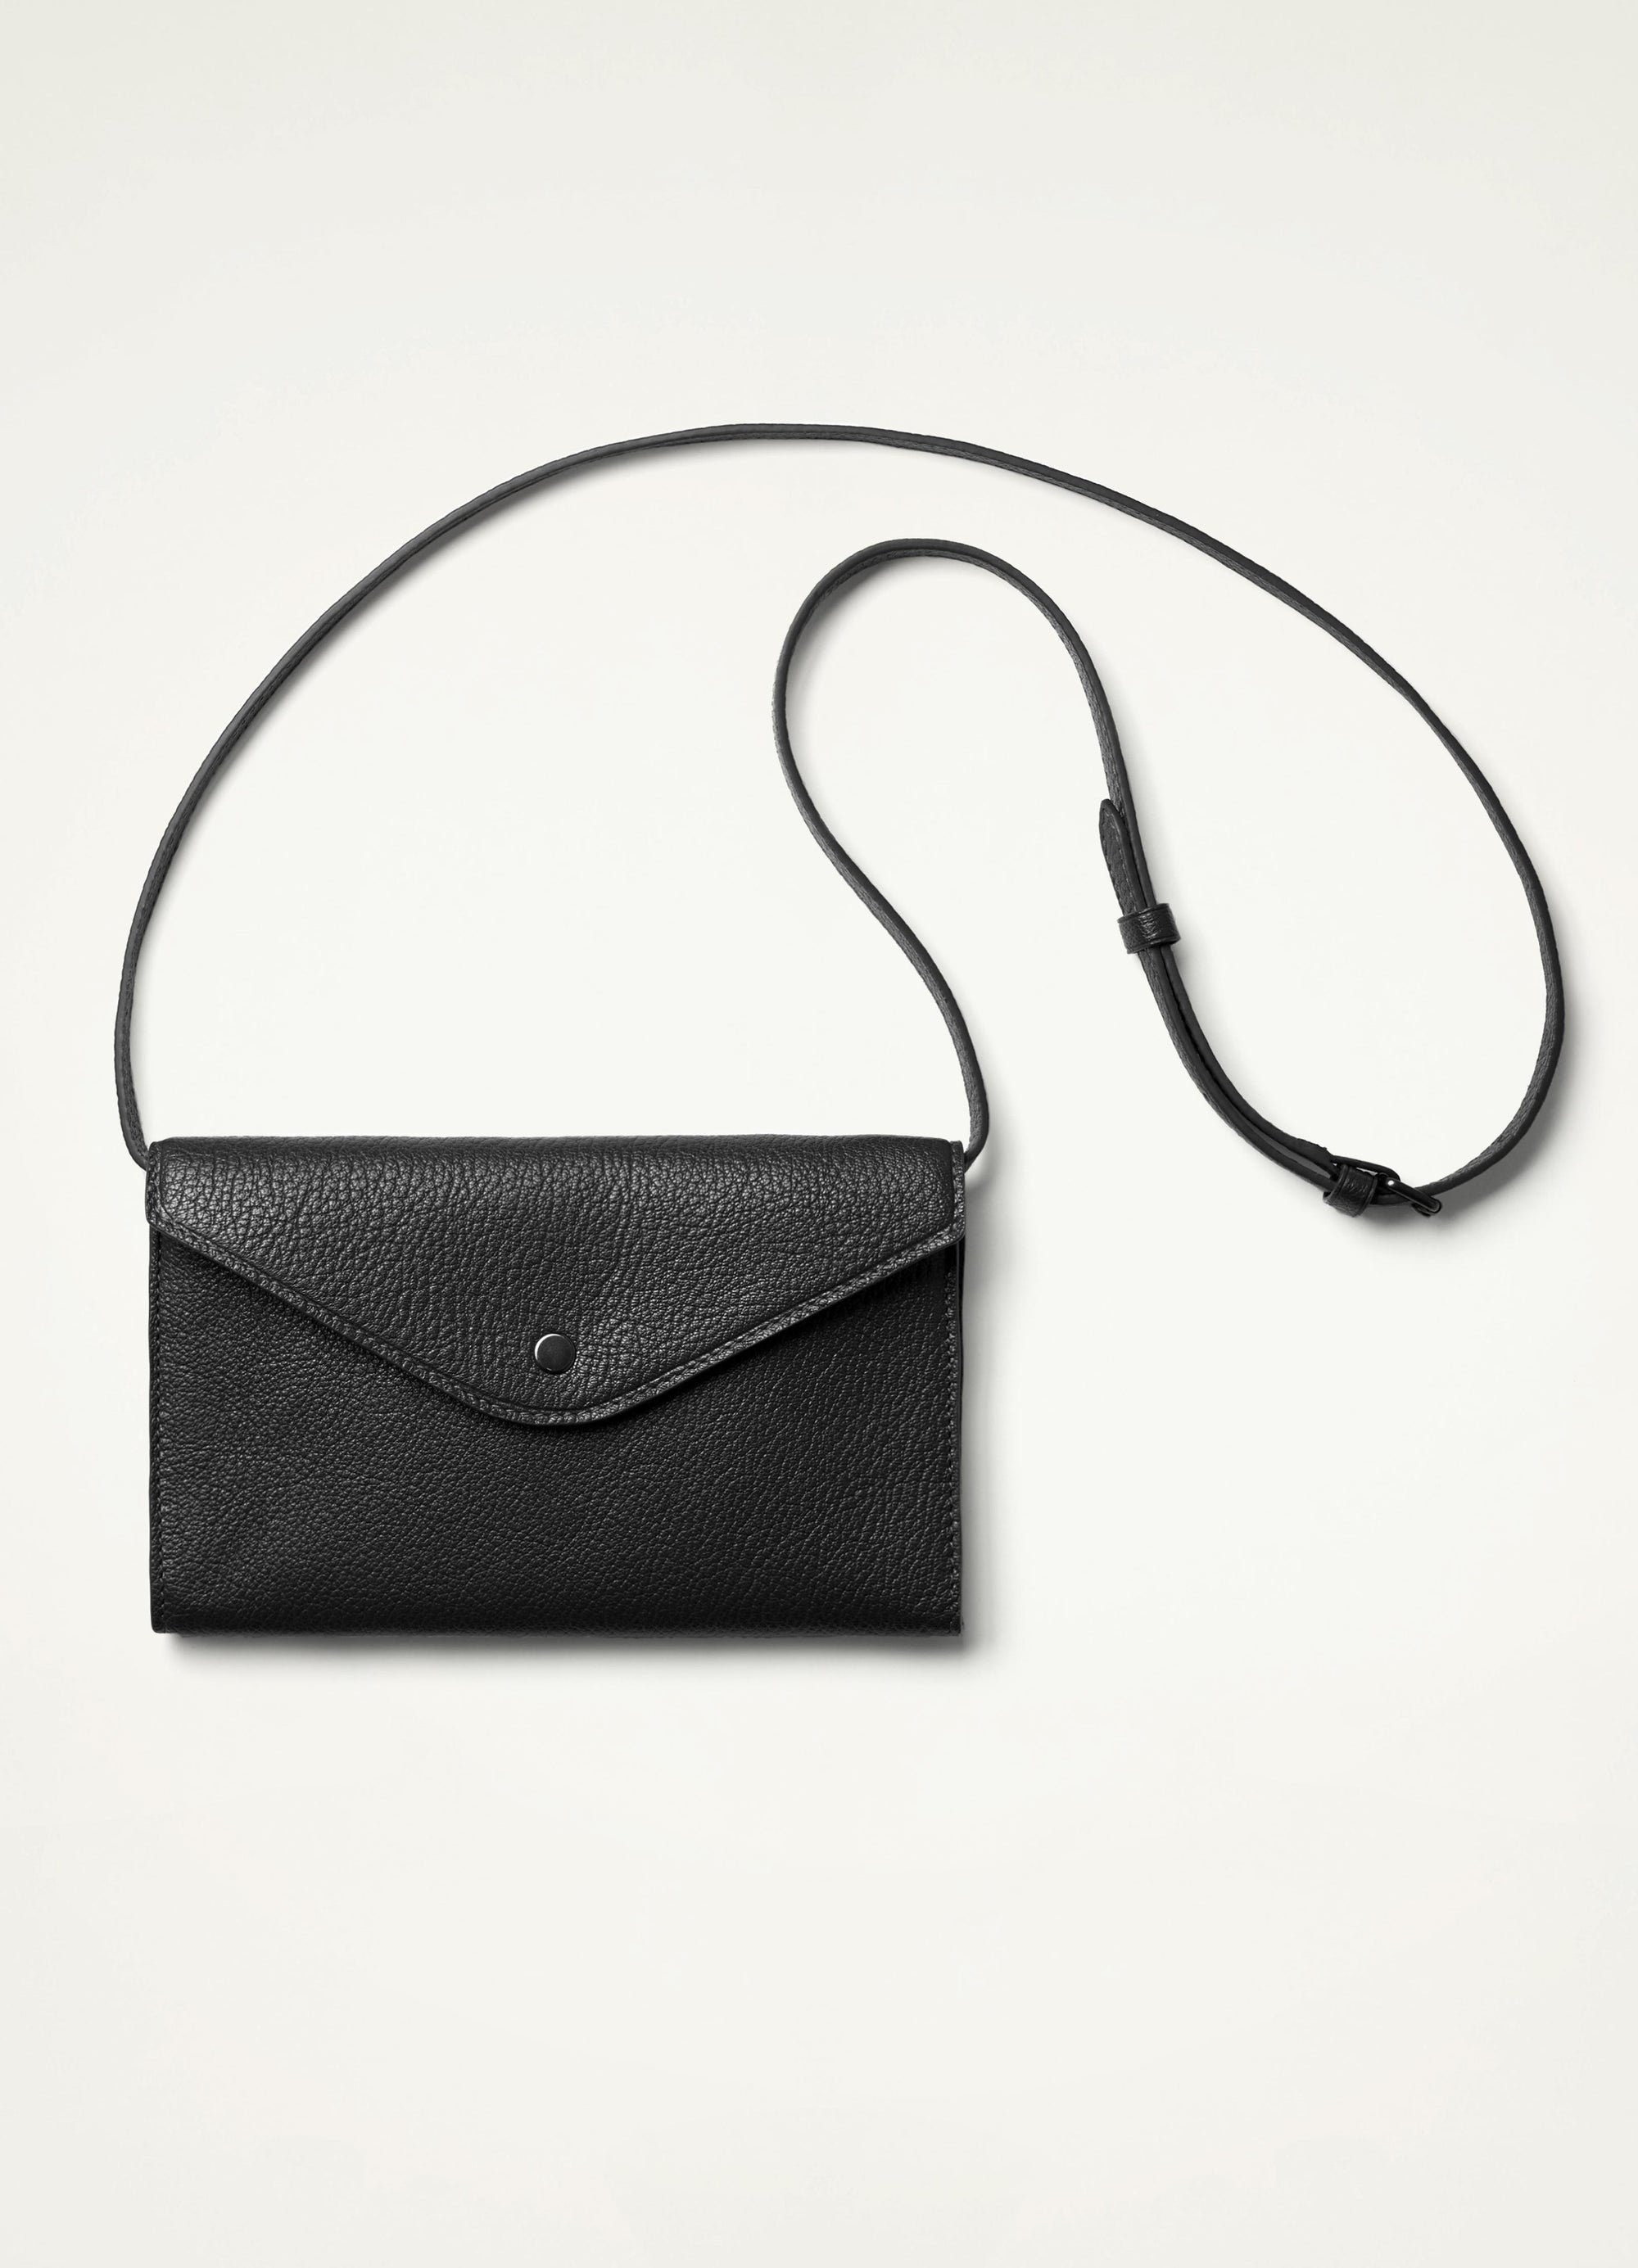 ENVELOPPE CONTINENTAL WALLET WITH STRAP
GOAT LEATHER - 1